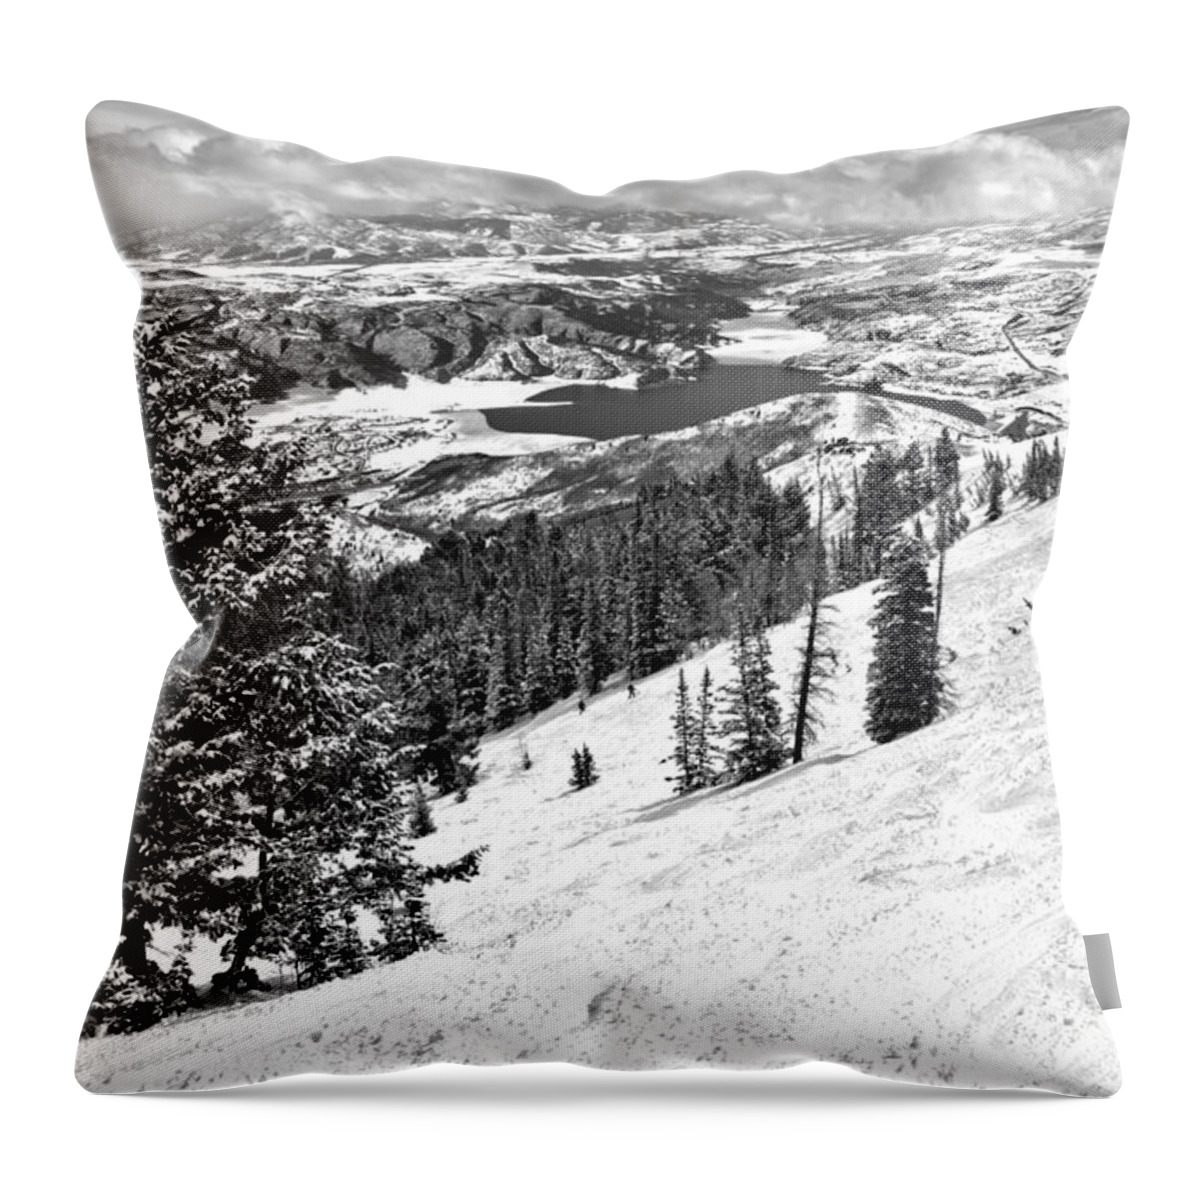 Deer Valley Throw Pillow featuring the photograph Deer Valley Views From The Bumps Black And White by Adam Jewell